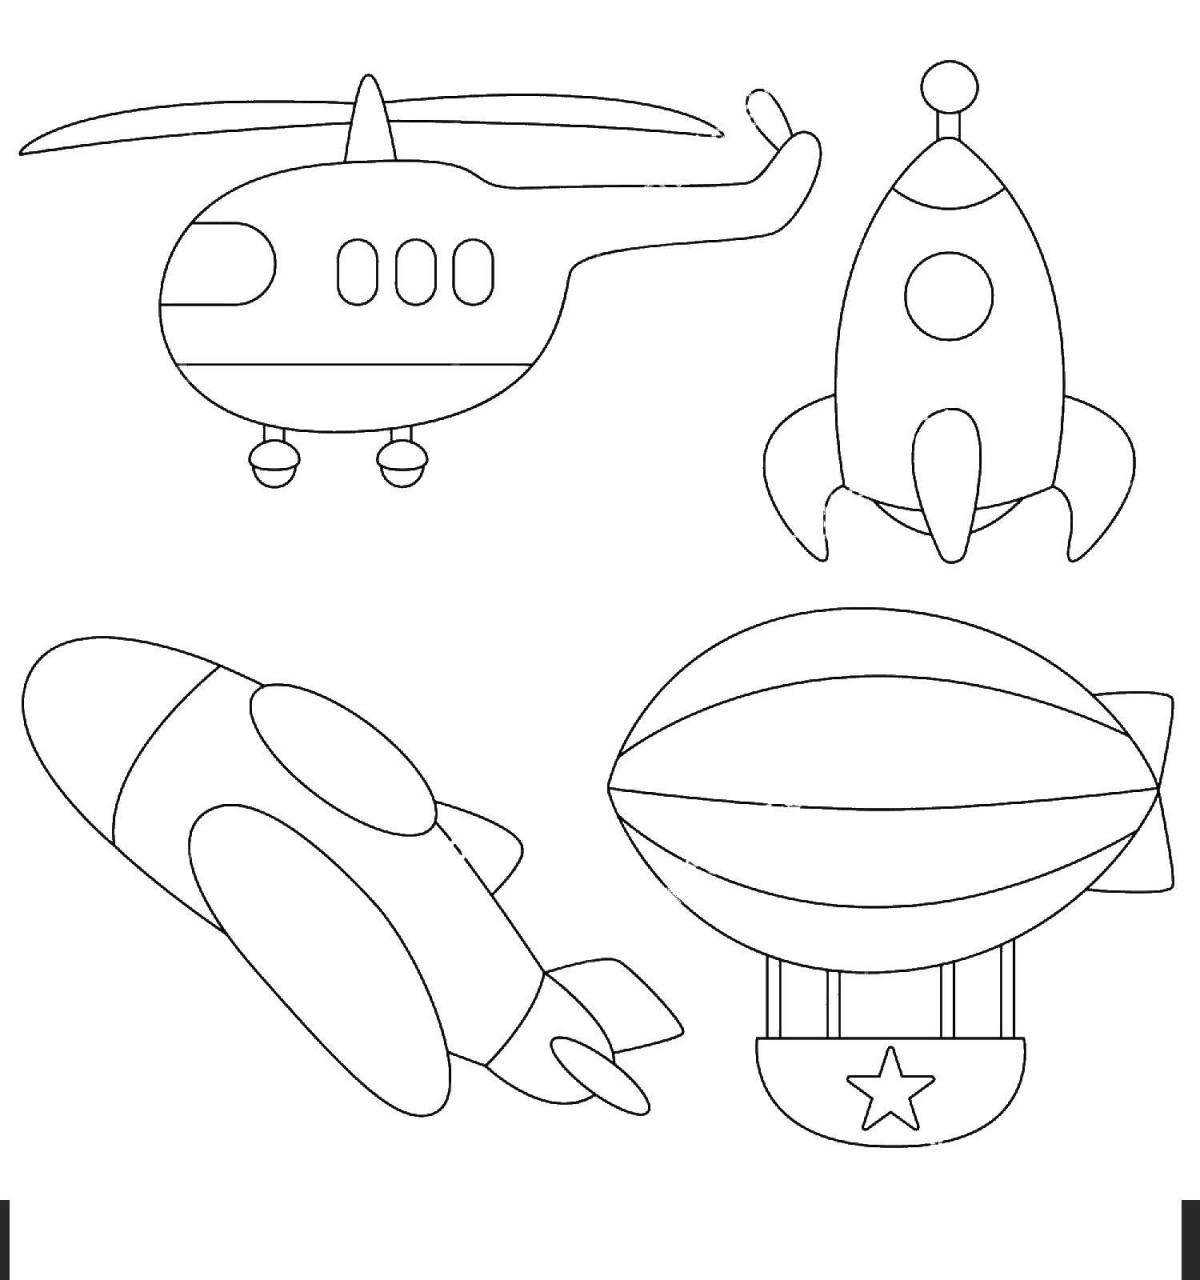 Air transport coloring pages for 6-7 year olds